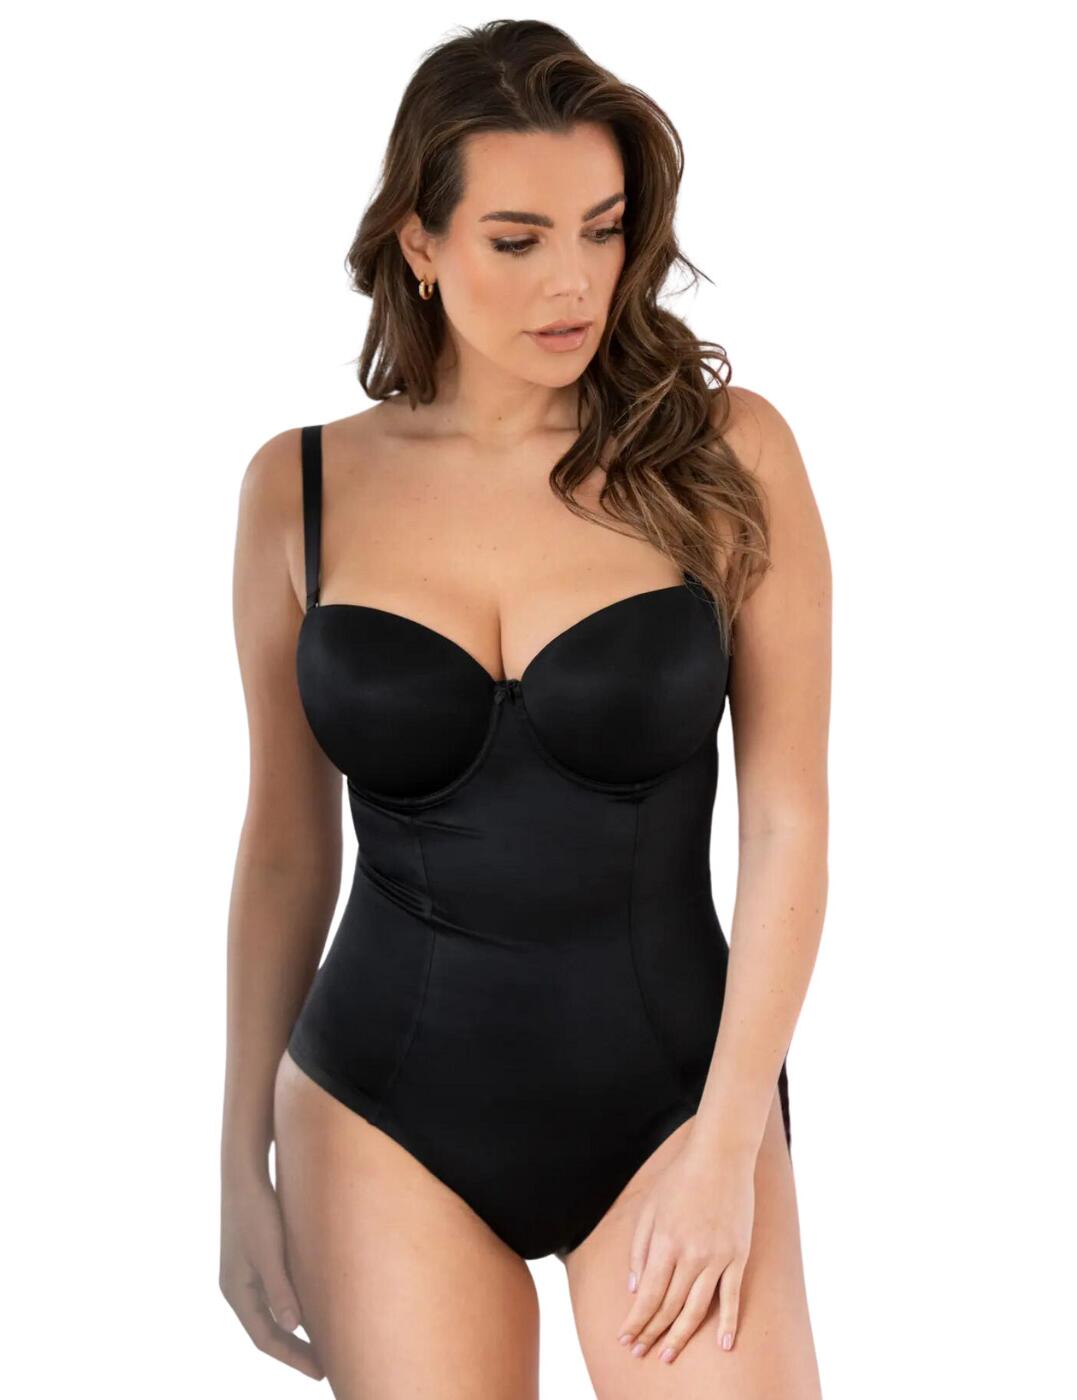 Belle Lingerie - Who said shapewear has to be frumpy? 🤷 Not us! The Pour  Moi Electra Underwired Body Shaper is flattering and practical. It  supports, smooths and boosts women of all